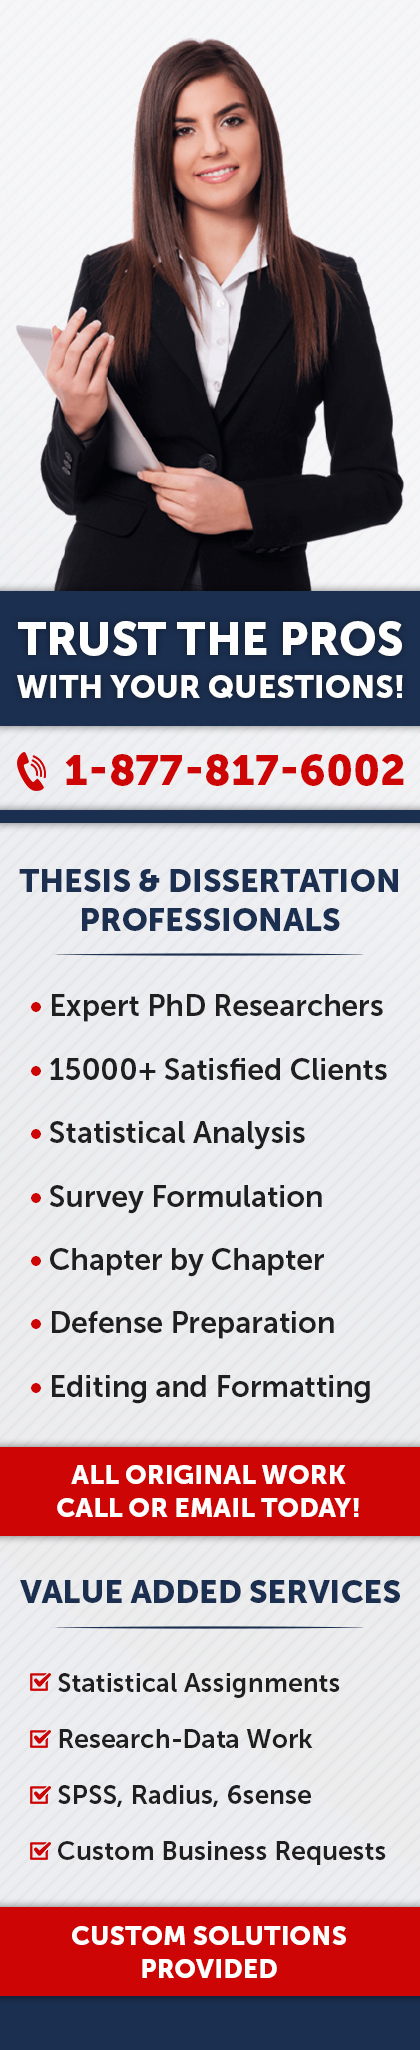 Thesis Dissertation Writing Services